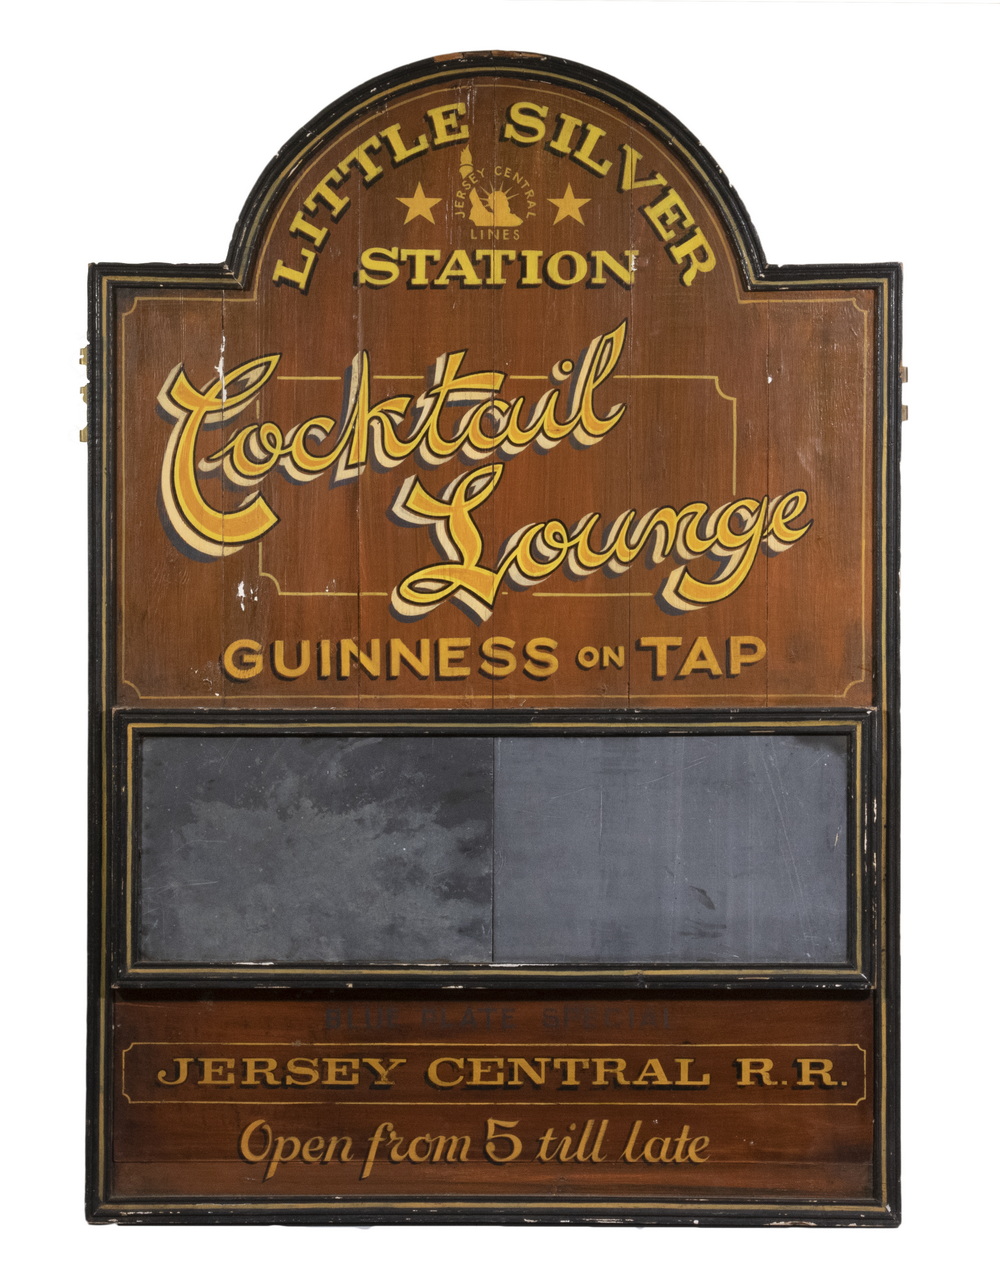 HAND PAINTED ADVERTISING SIGN: